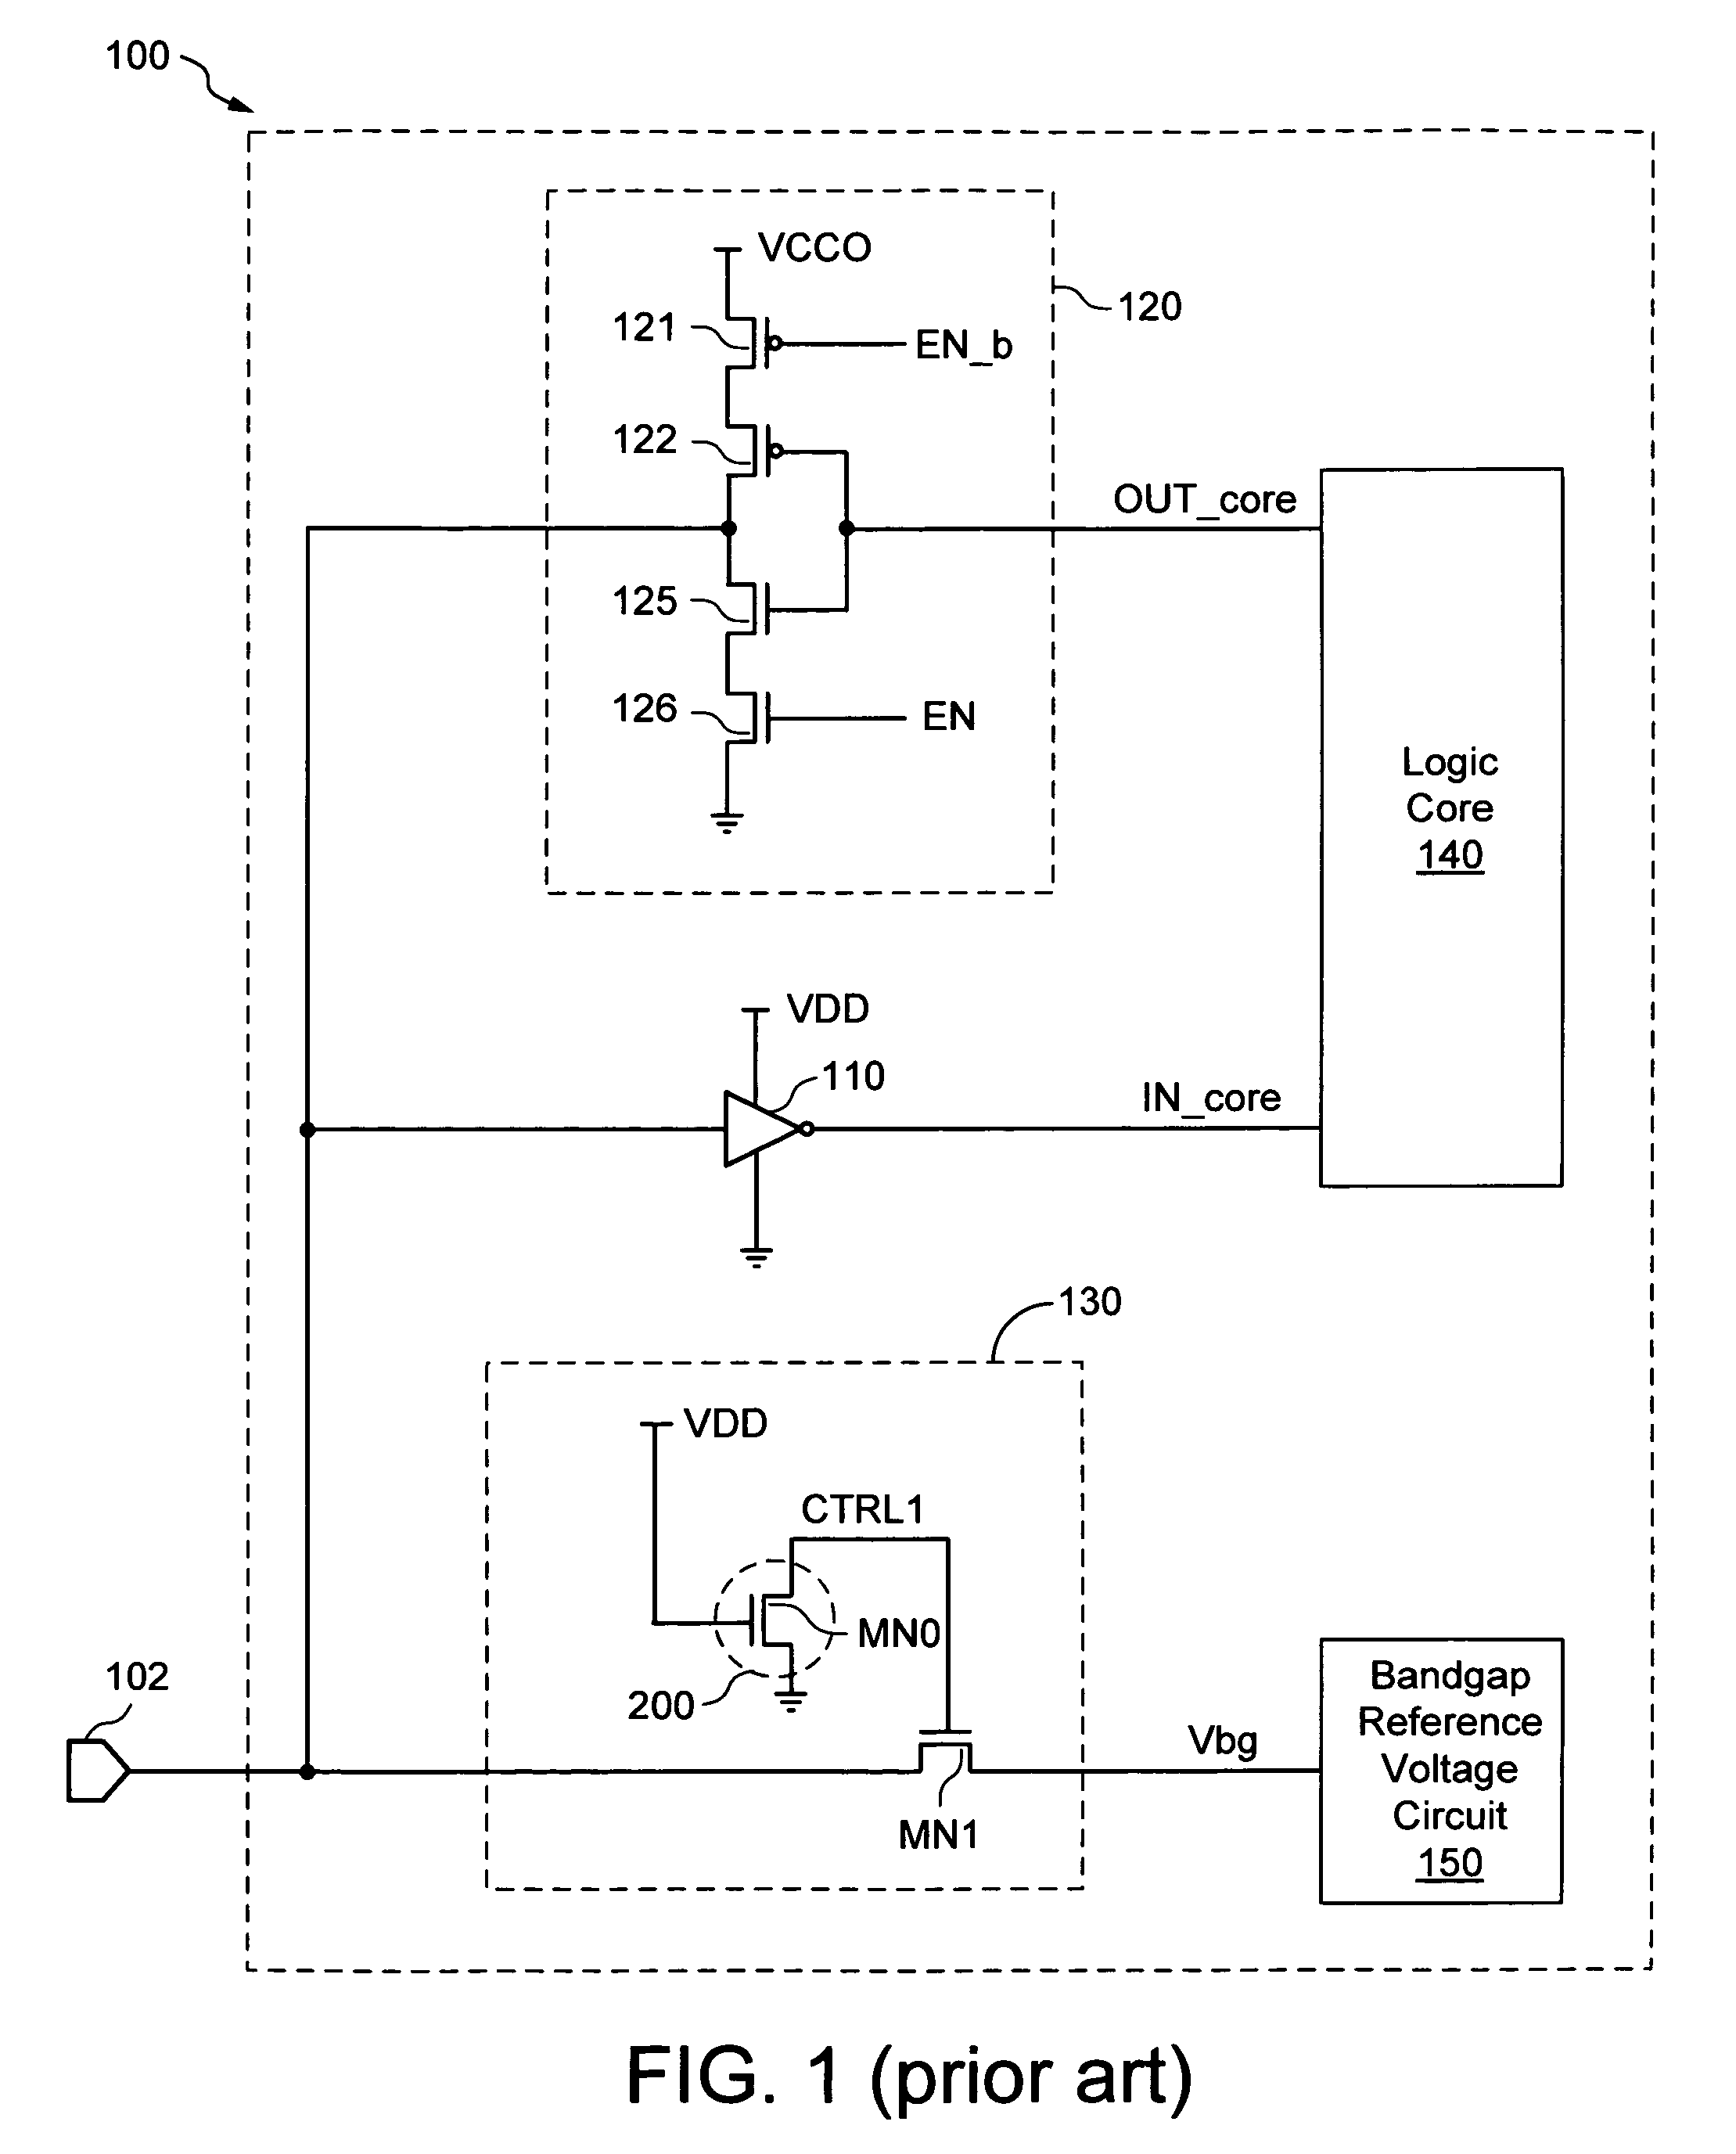 Ground bounce protection circuit for a test mode pin